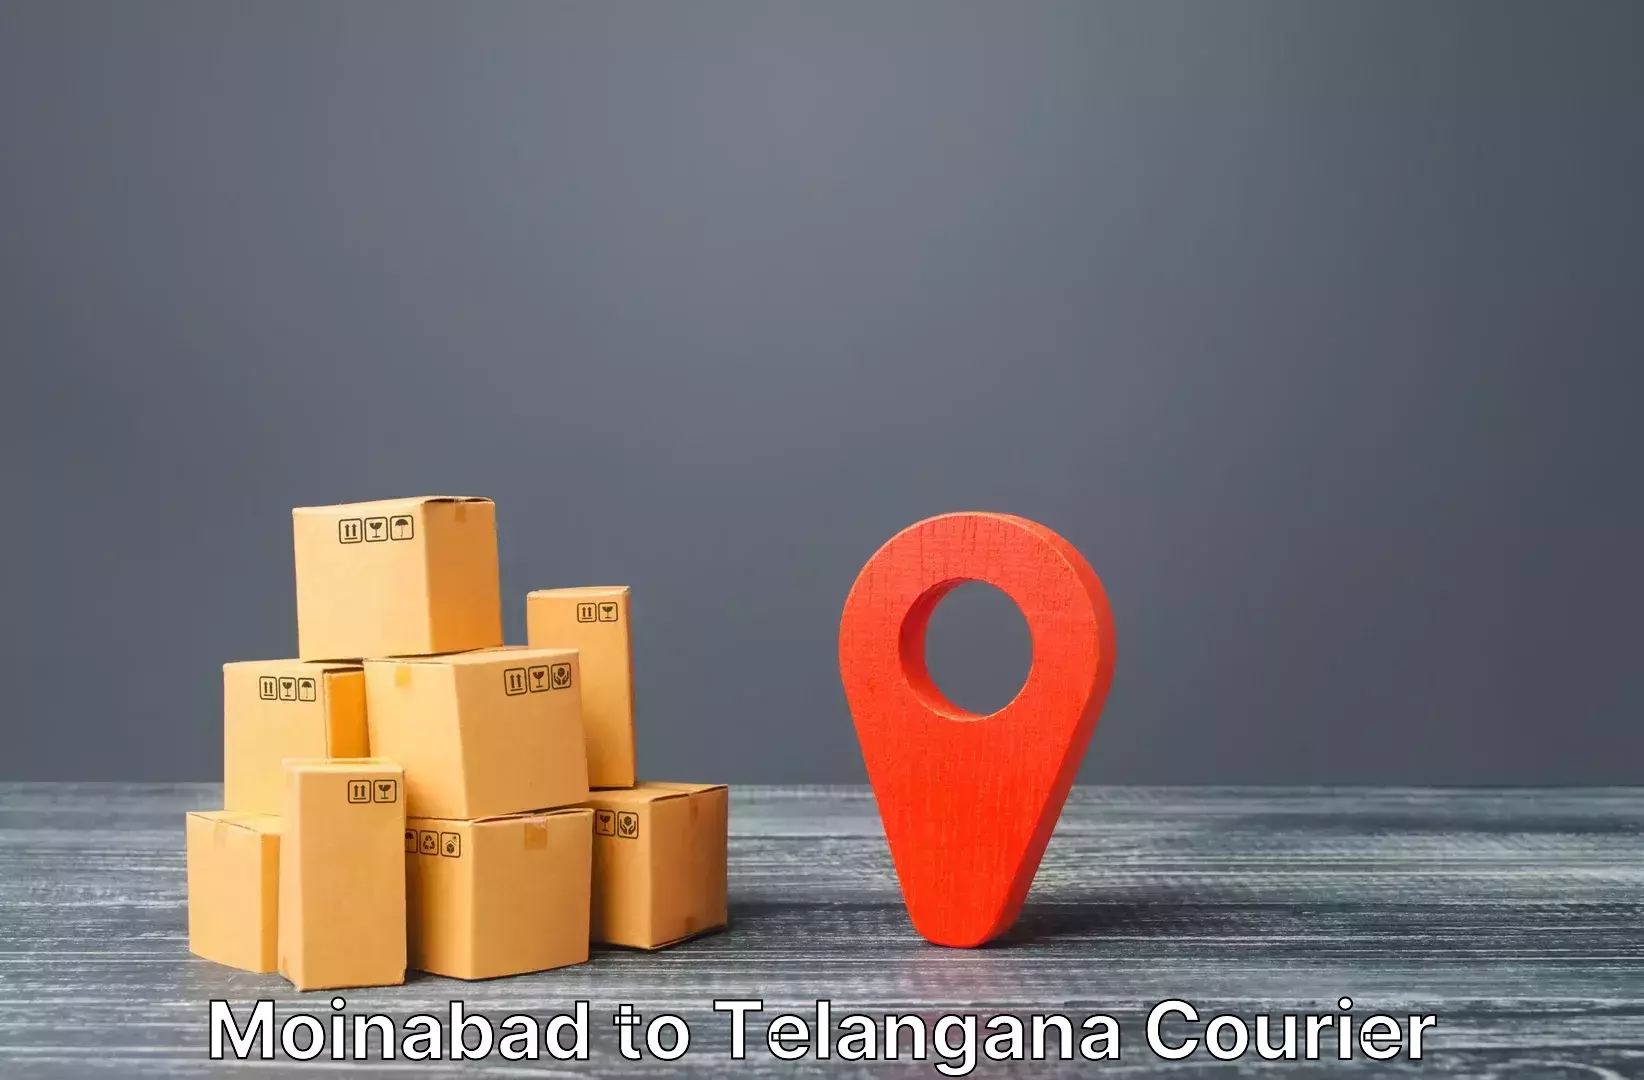 Hotel to Door baggage transport Moinabad to Moinabad